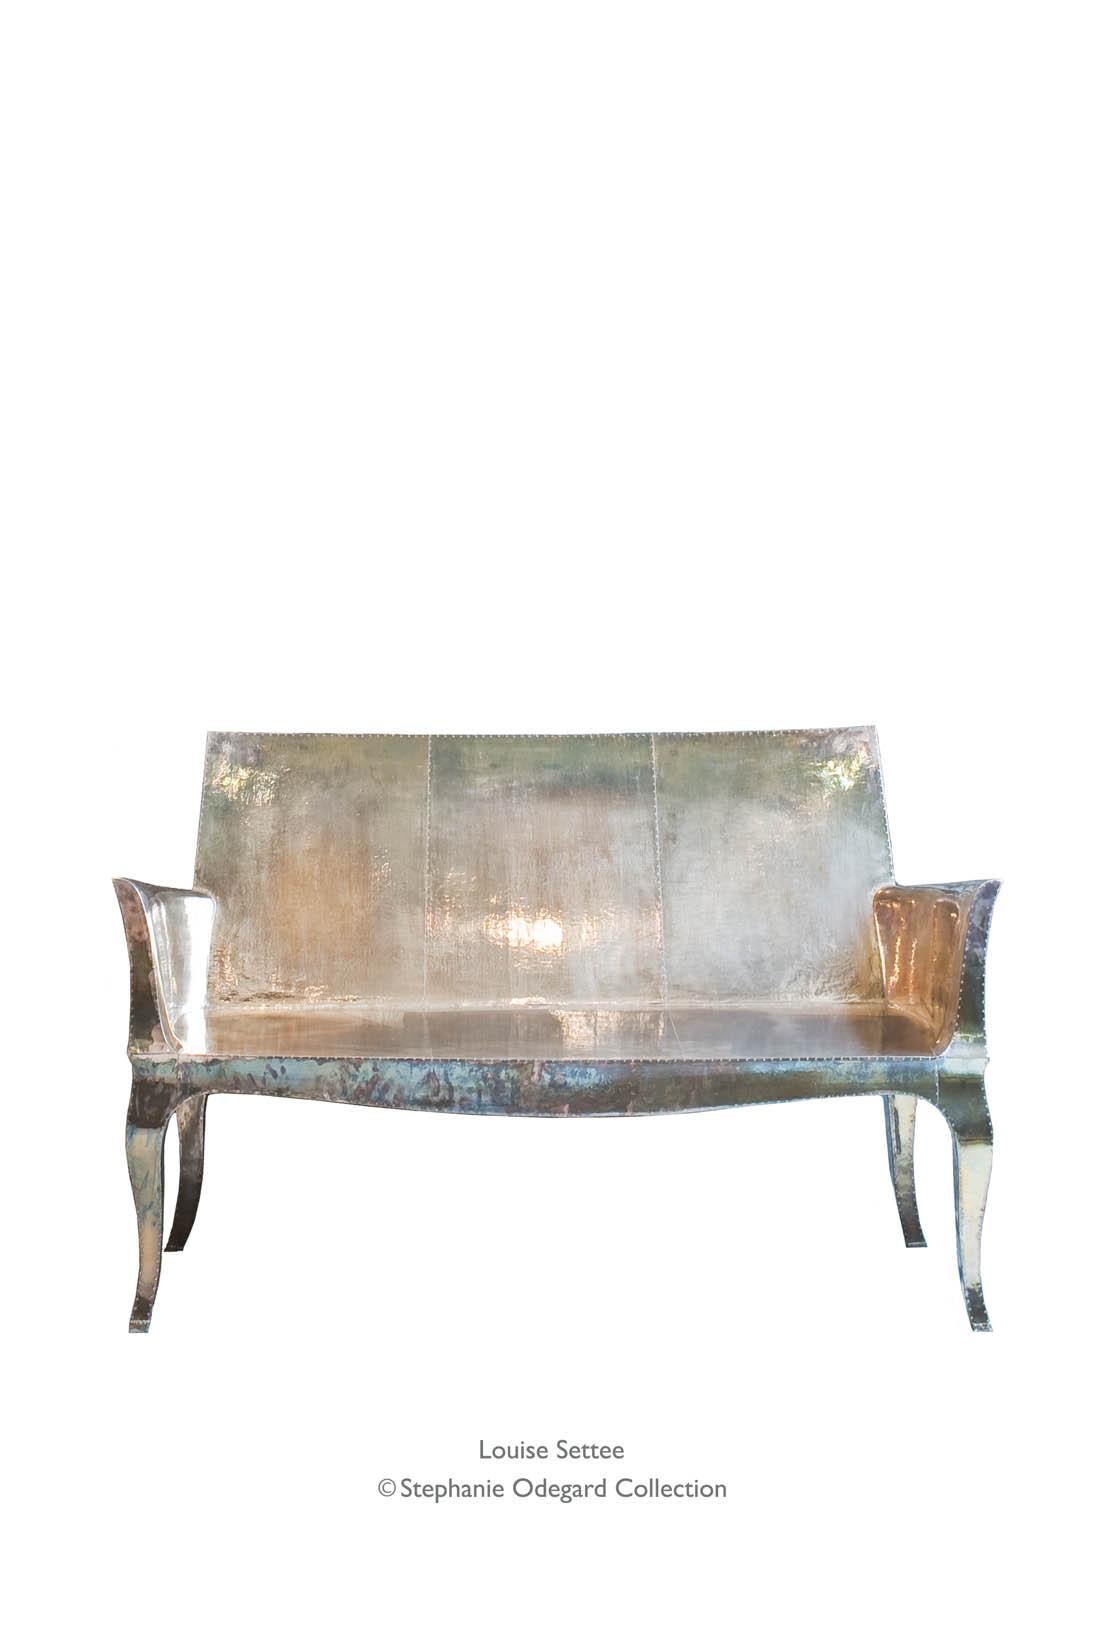 Louise Settee Art Deco Chaise Longues  in Mid. Hammered Copper by Paul Mathieu For Sale 6